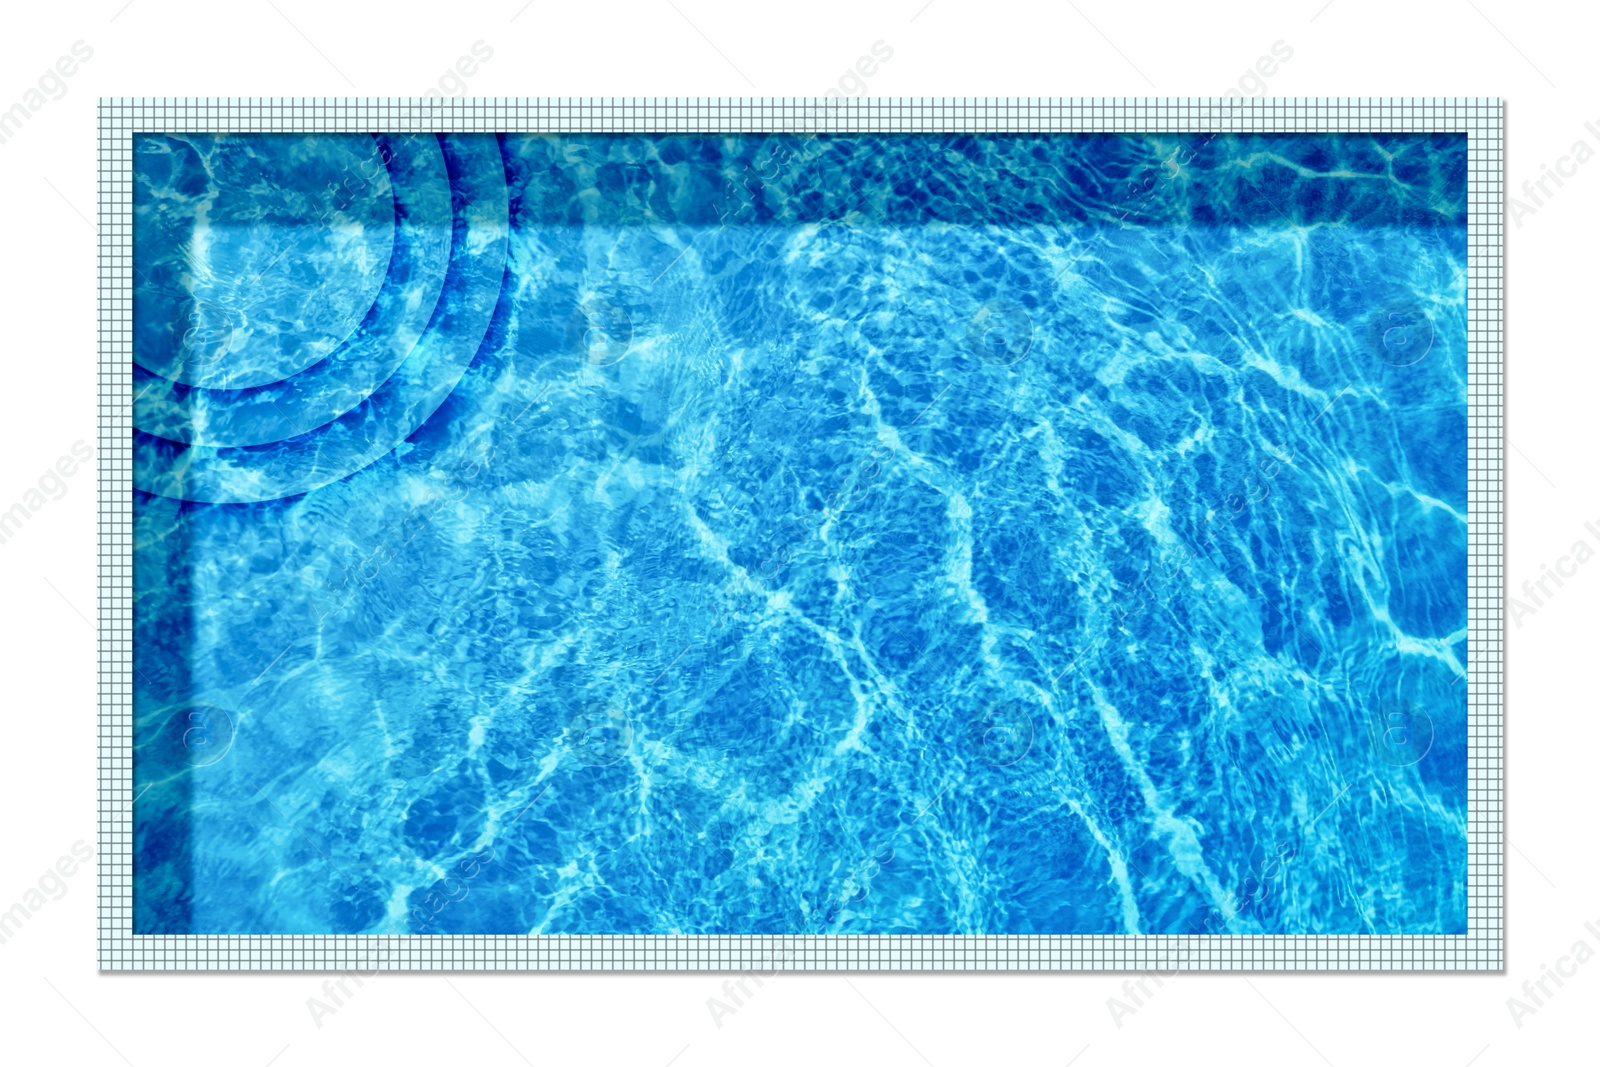 Image of Rectangle shaped swimming pool on white background, top view